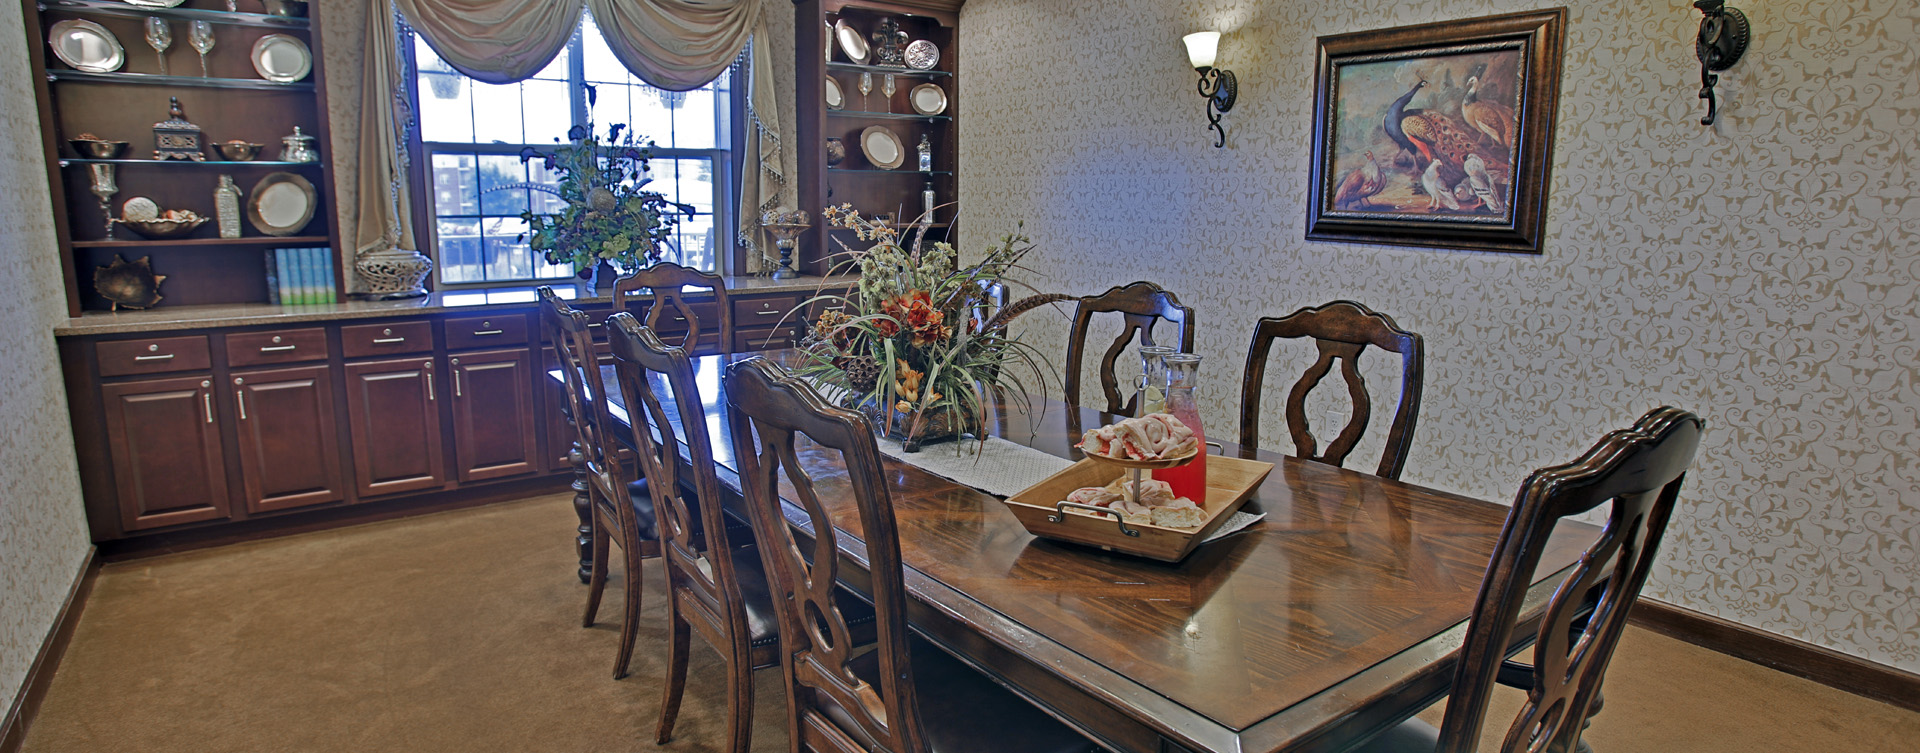 Celebrate special occasions in the private dining room at Bickford of Greenwood